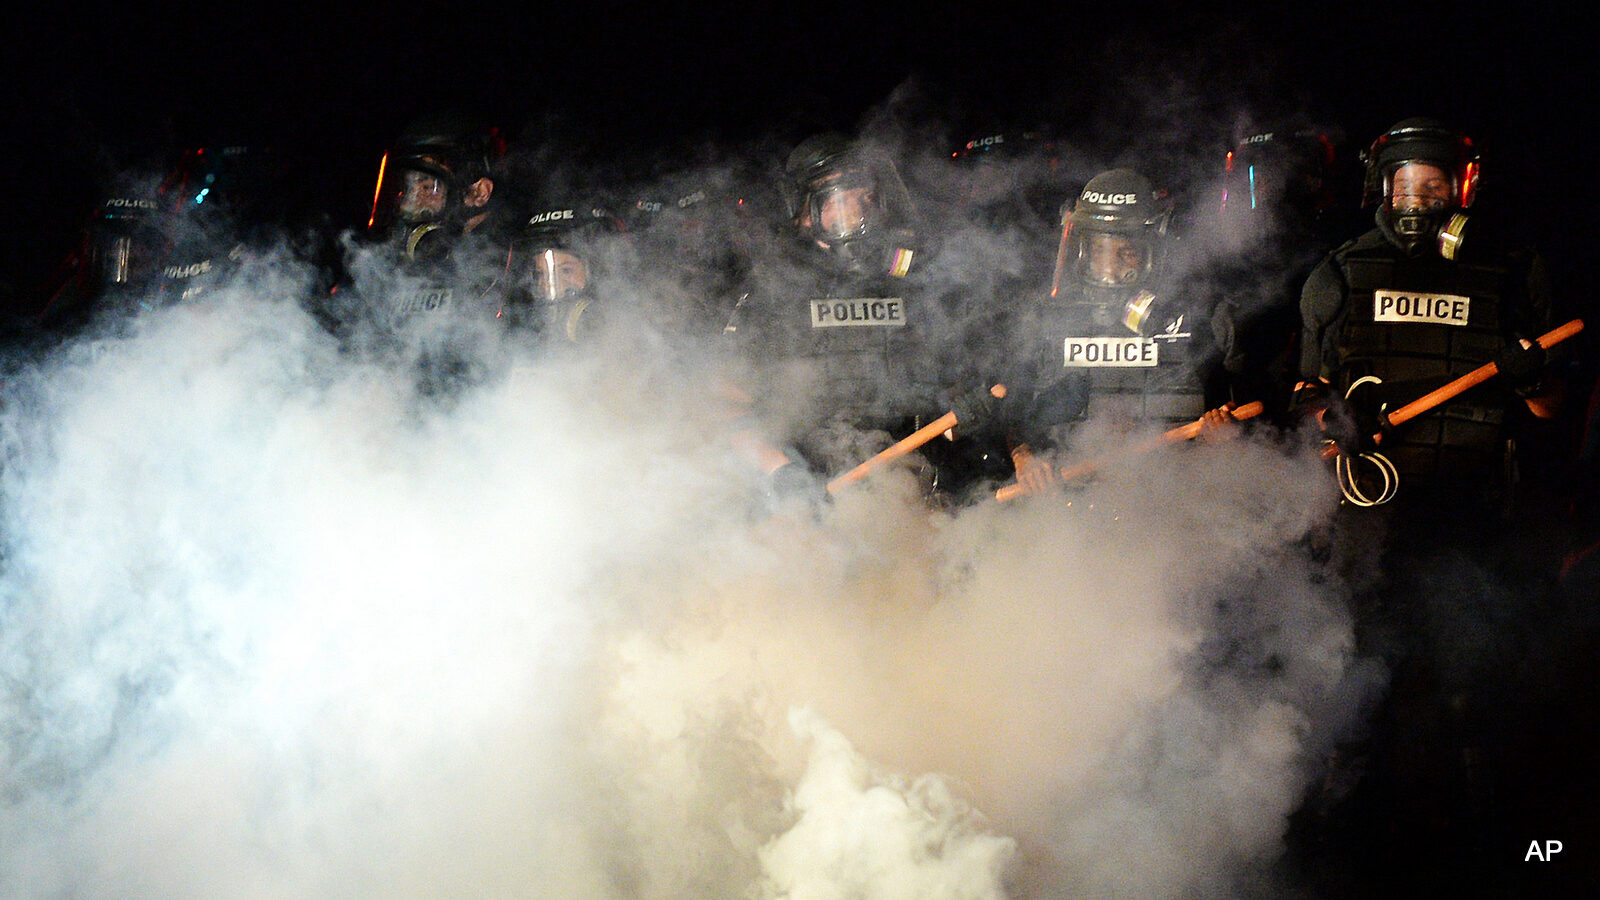 Police stand in formation in Charlotte, N.C., Tuesday, Sept. 20, 2016. Authorities used tear gas to disperse protesters in an overnight demonstration that broke out Tuesday after Keith Lamont Scott was fatally shot by an officer at an apartment complex.